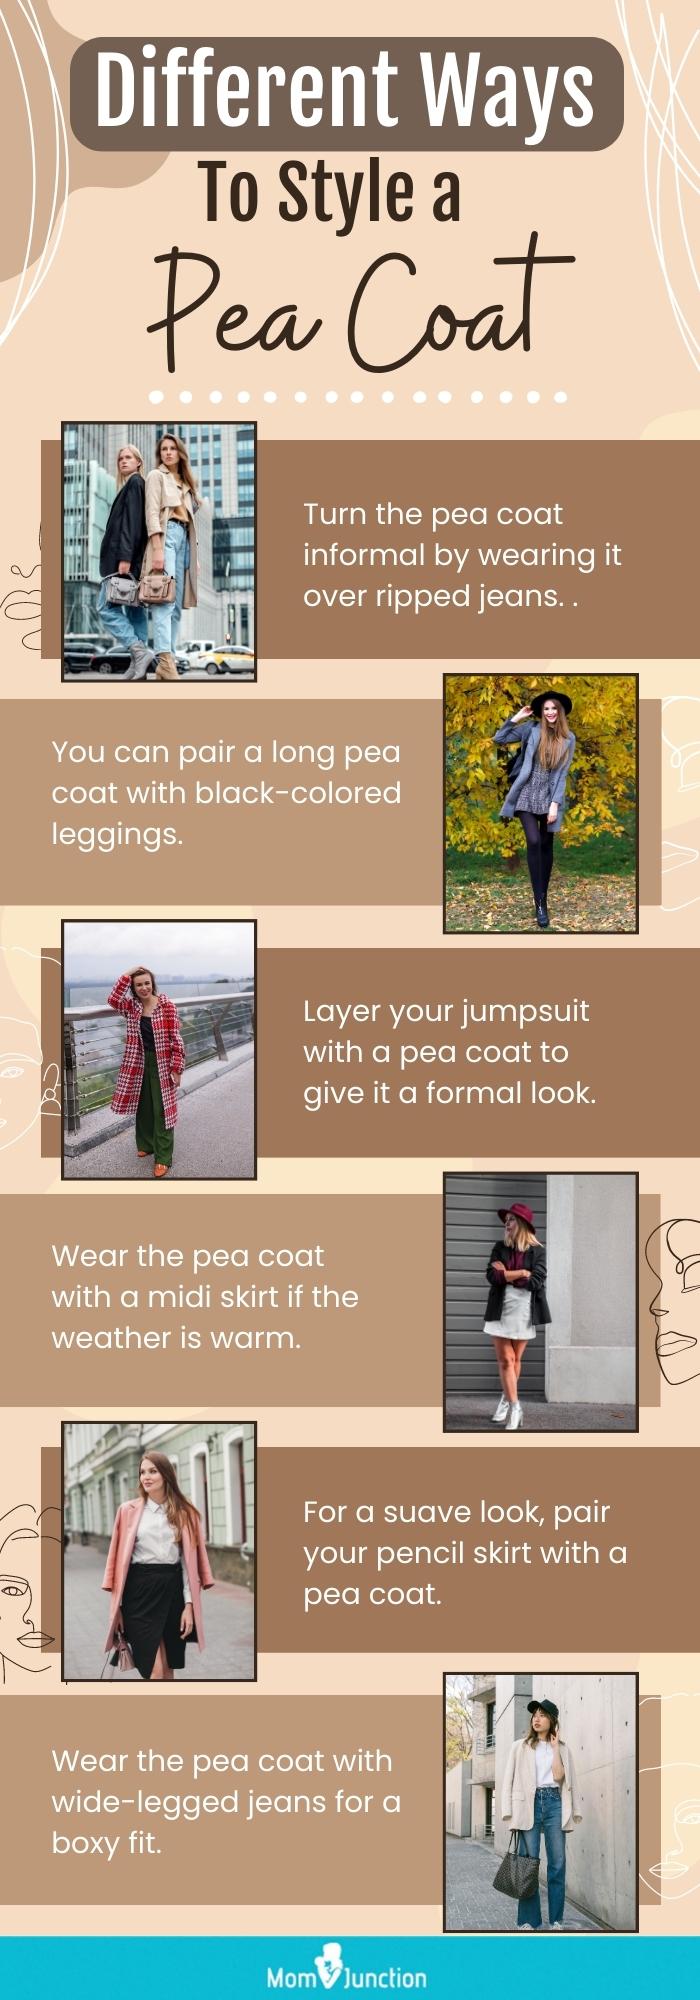 Different Ways To Style A Pea Coat